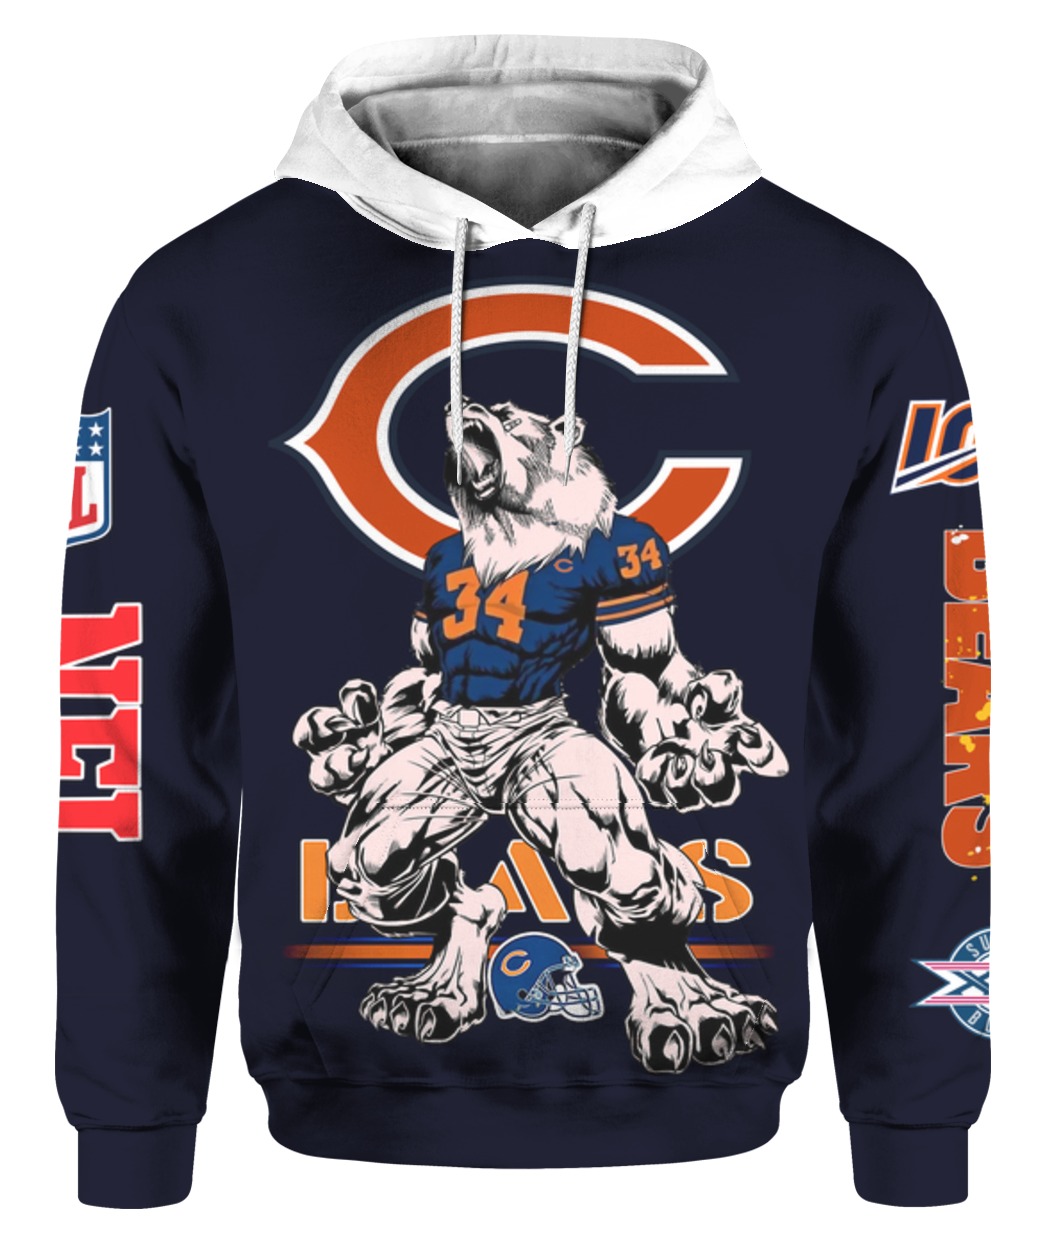 Chicago bears mascot all over print hoodie 1